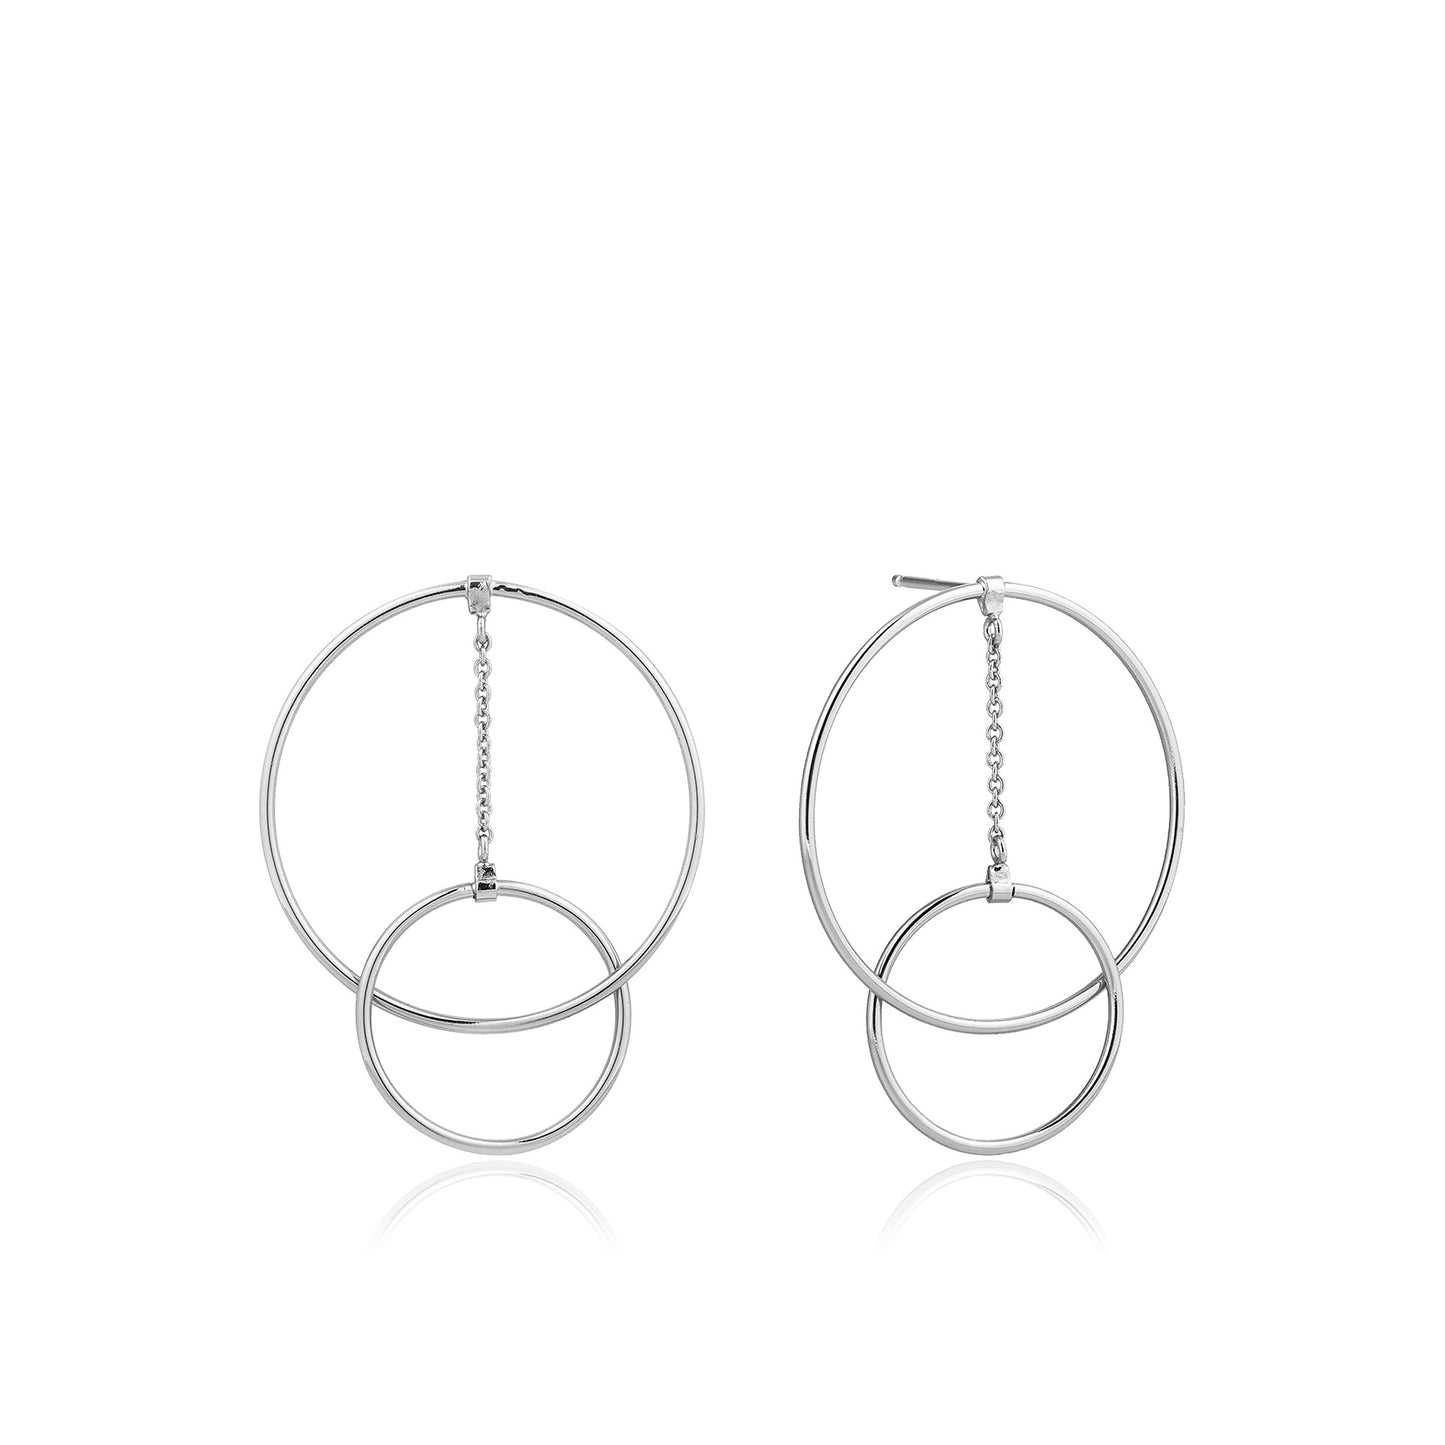 ANIA HAIE ANIA HAIE - Silver Modern Front Hoop Earrings available at The Good Life Boutique